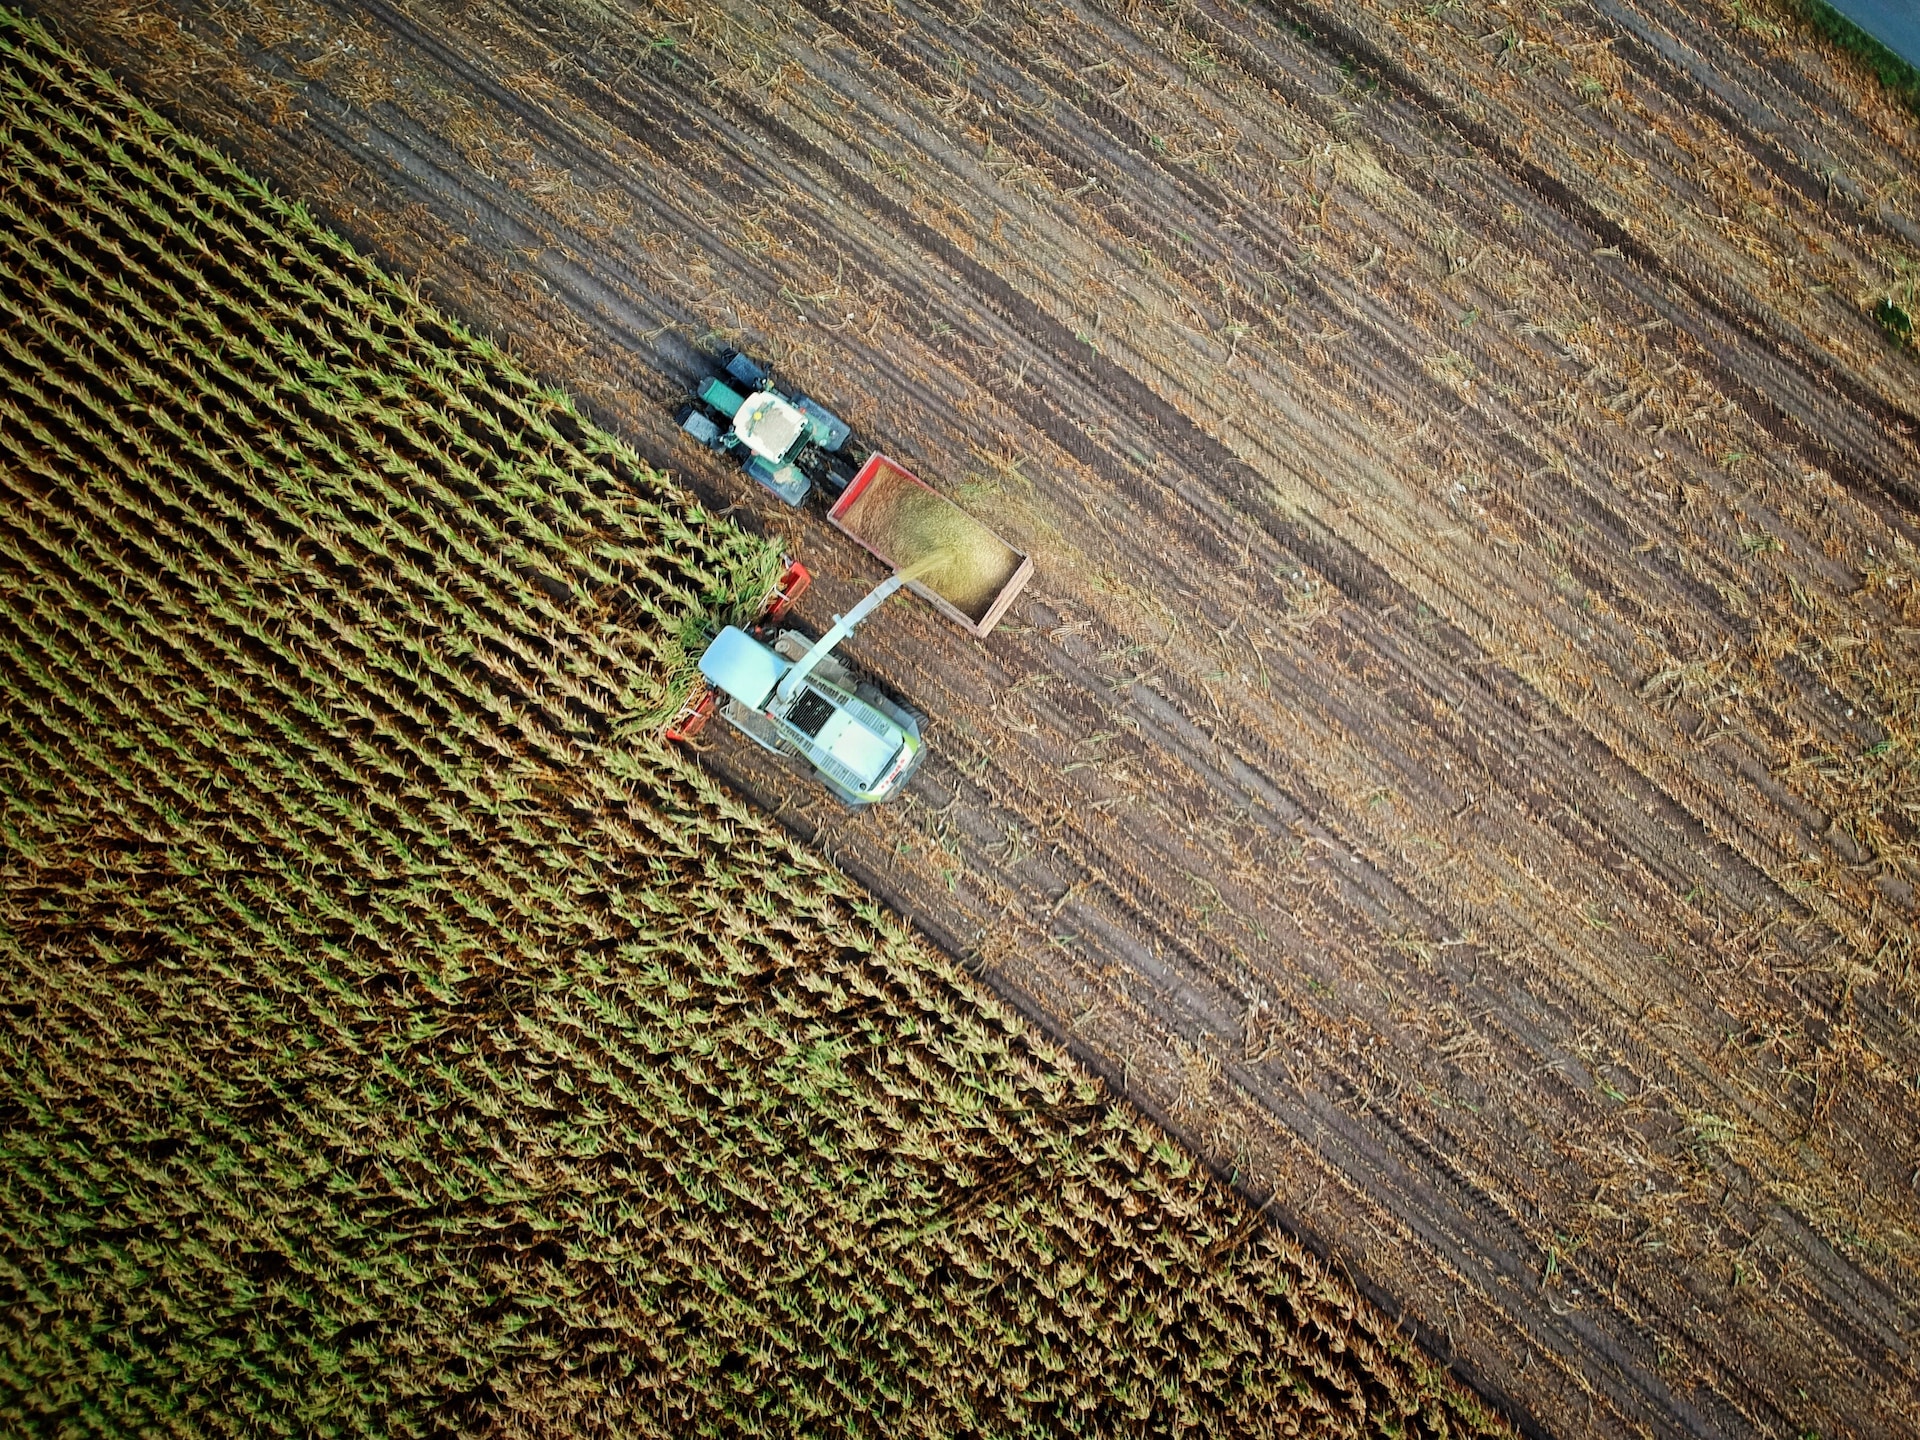 Tractor and combine harvester in field